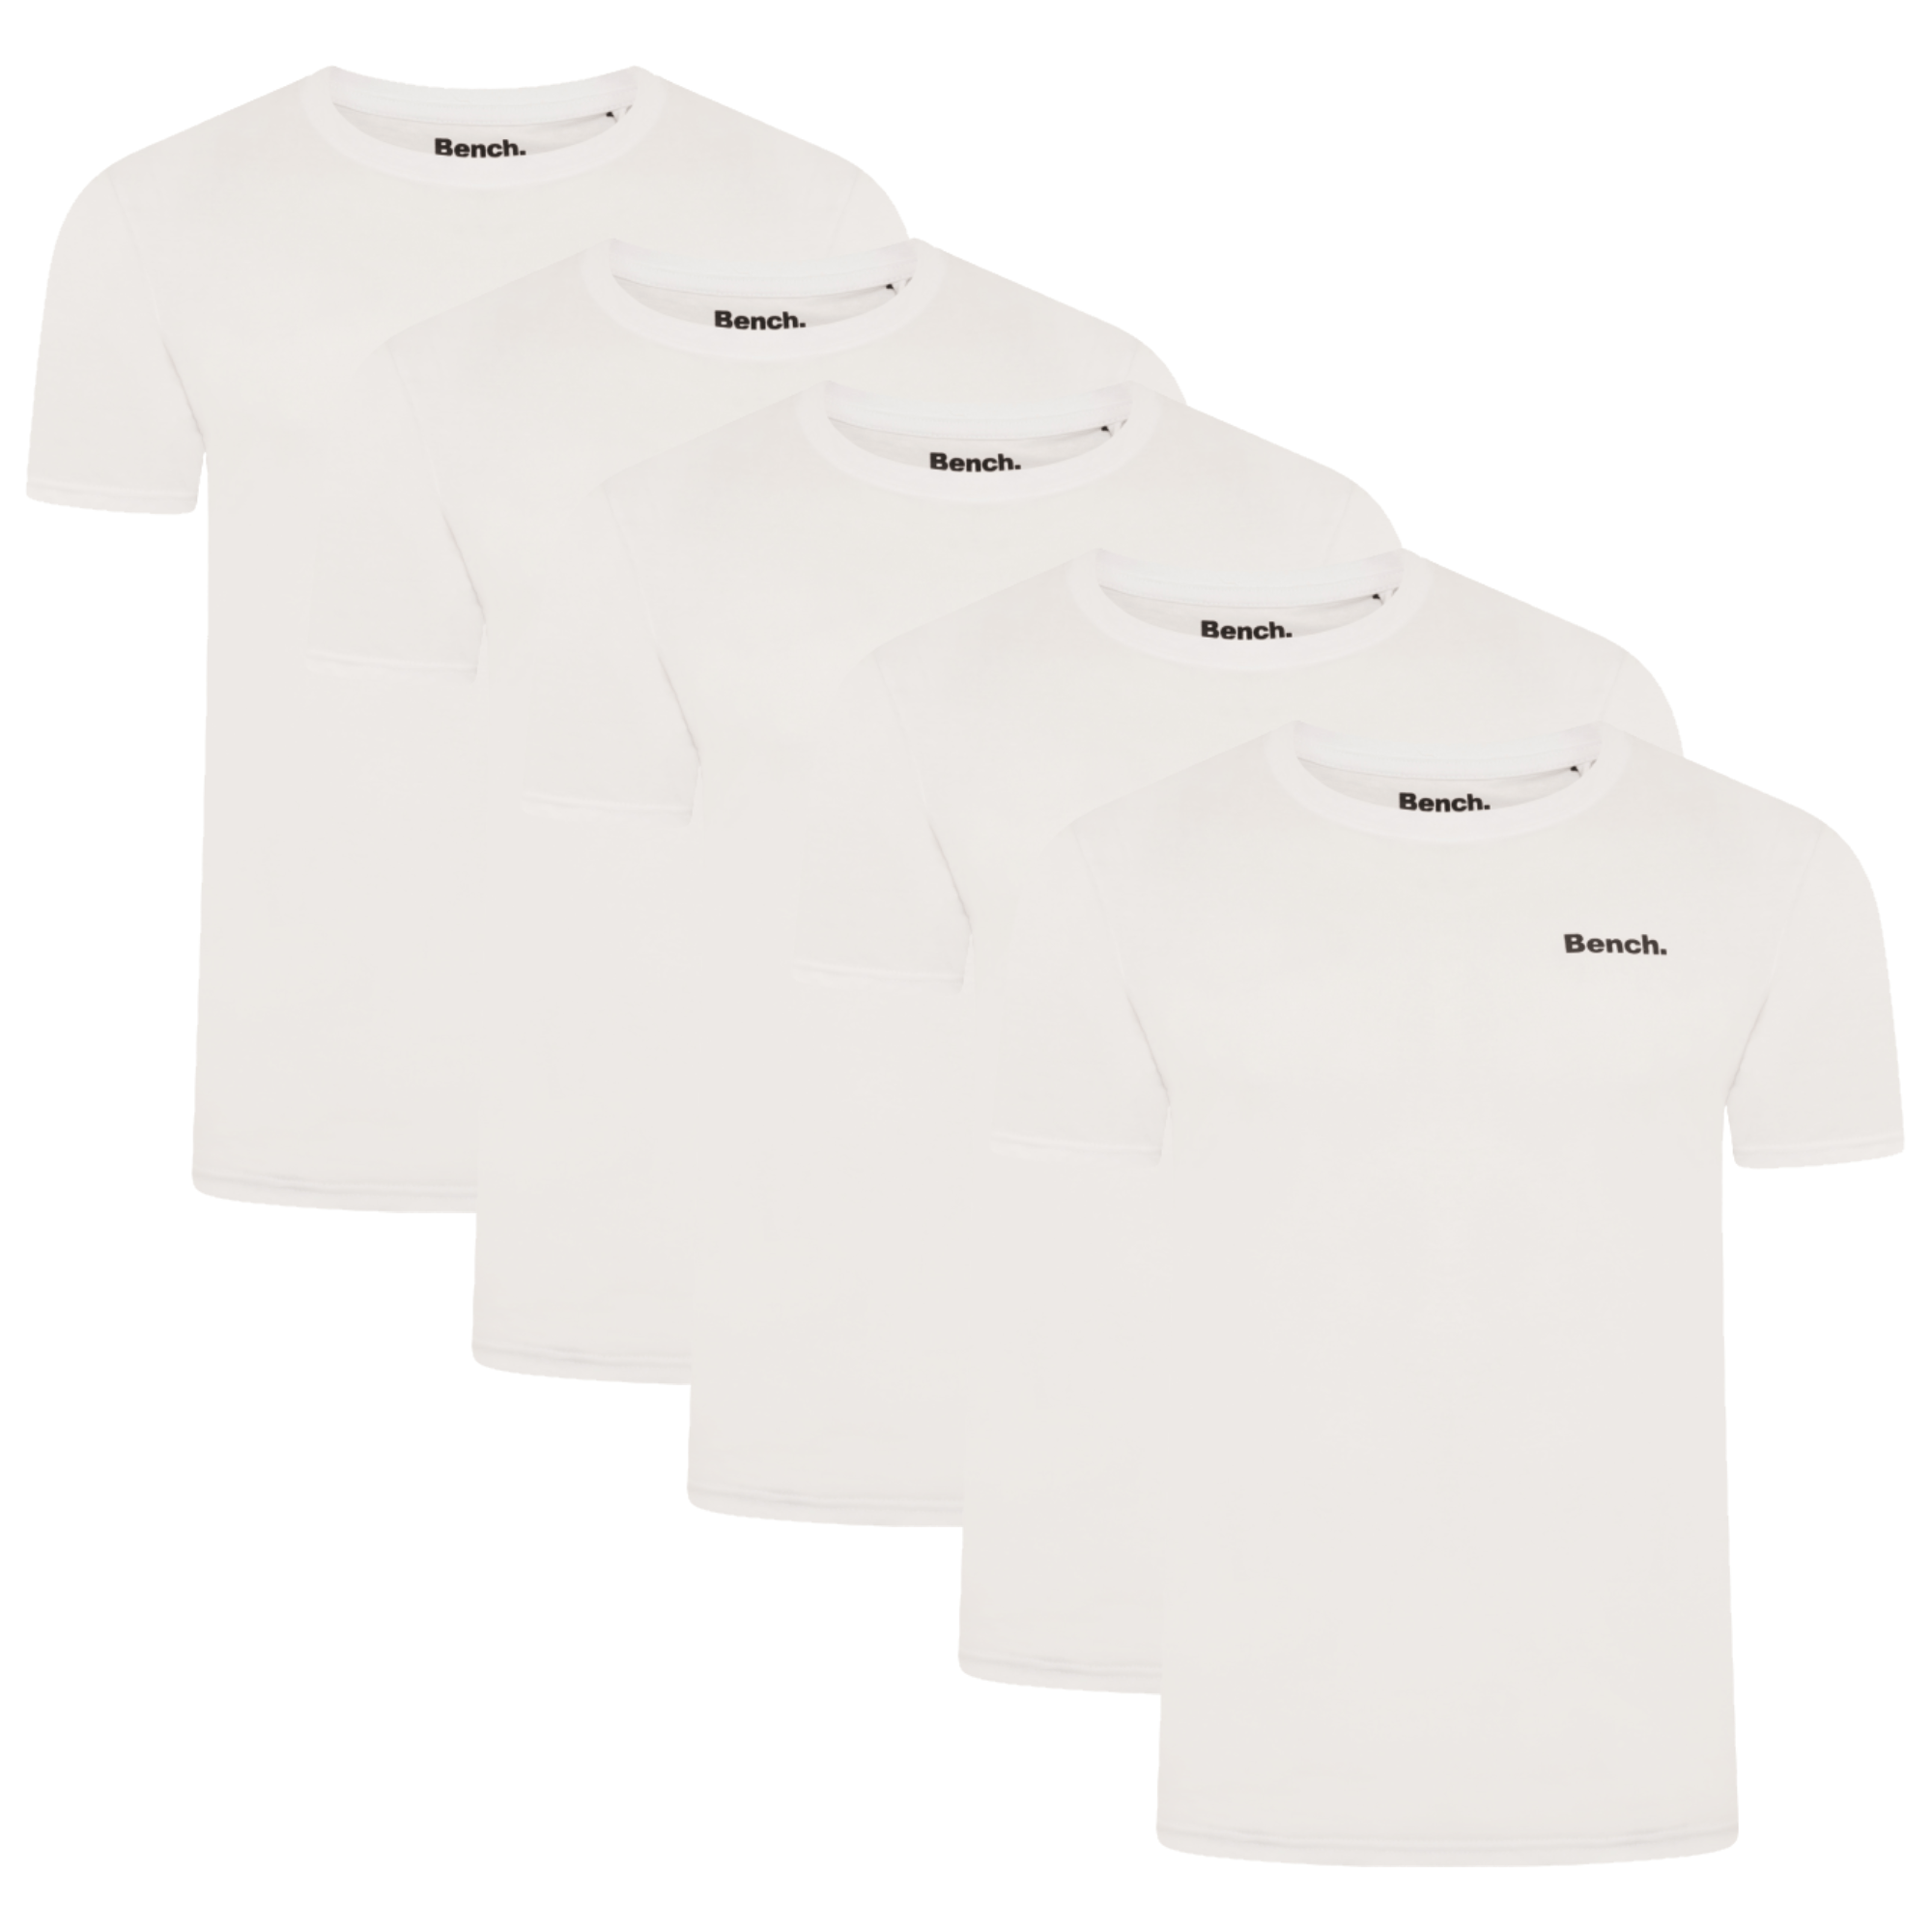 Mens 'PHILSON' 5 Pack T-Shirt - WHITE - Shop at www.Bench.co.uk #LoveMyHood